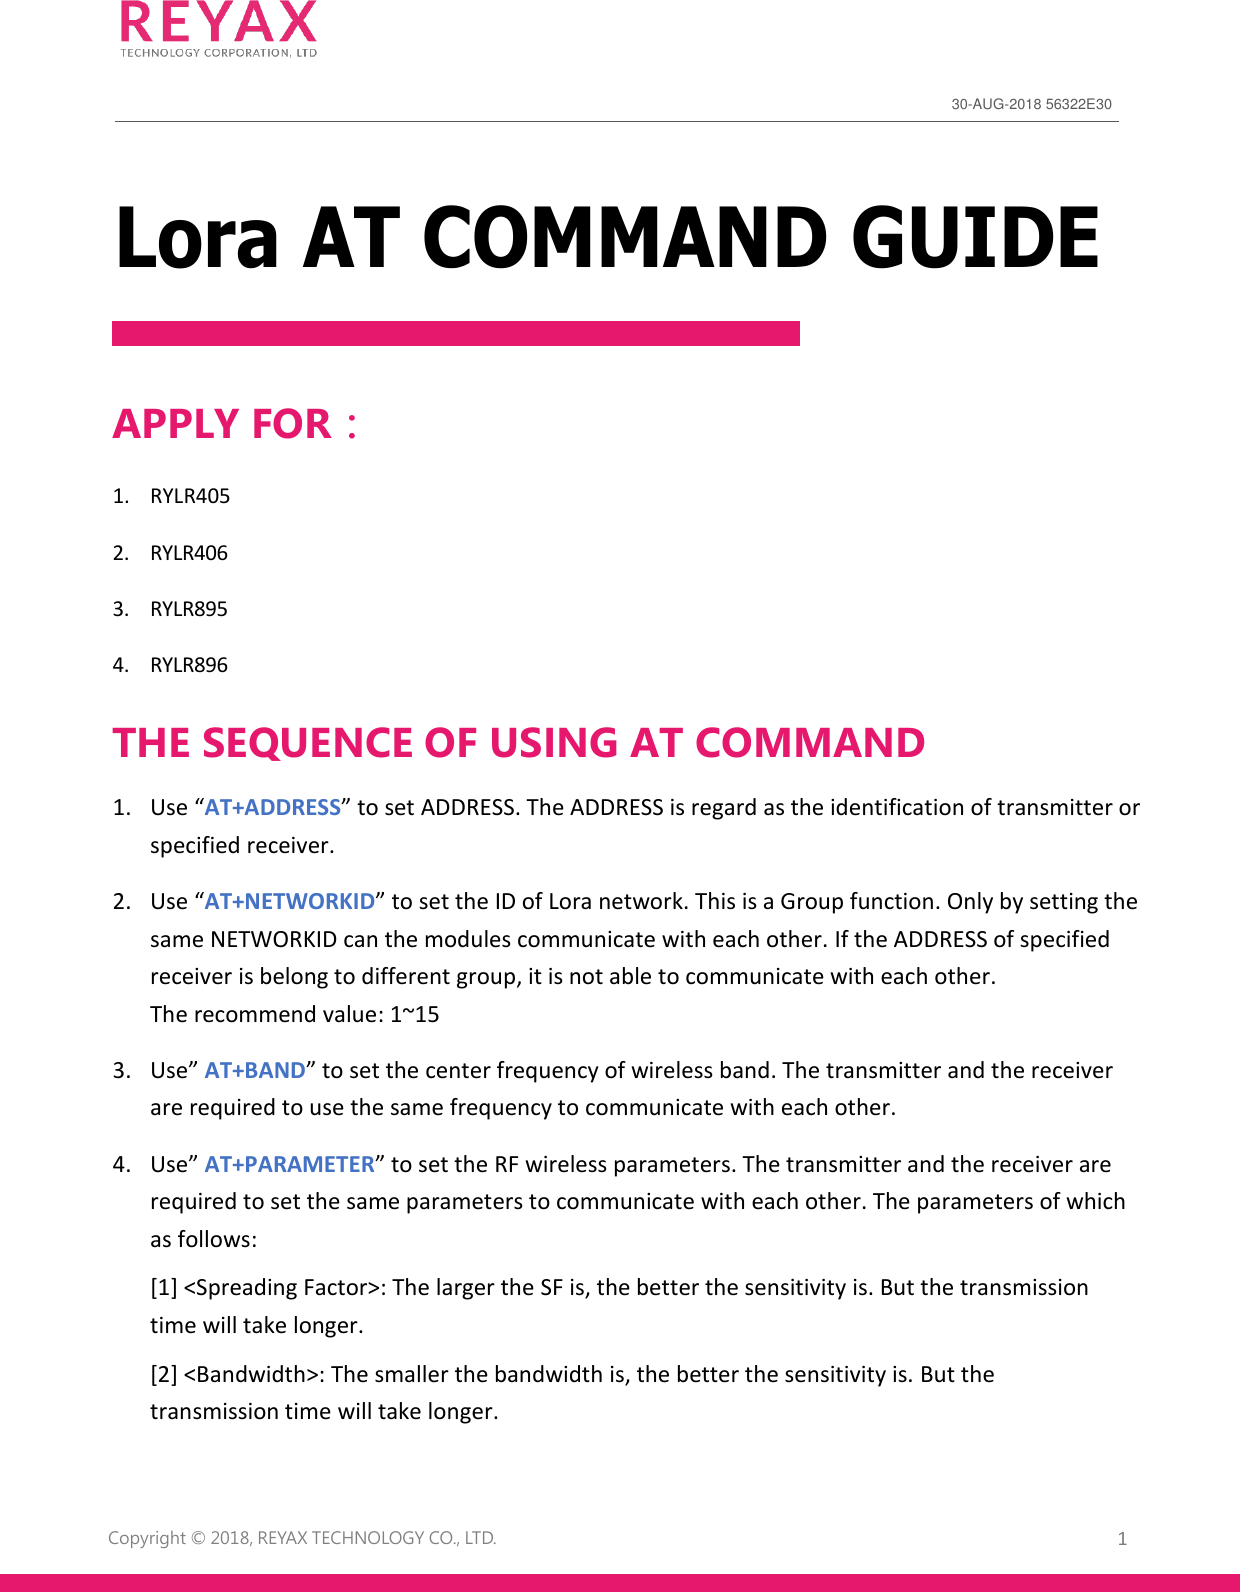 Page 1 of 9 - REYAX-Lora AT COMMAND GUIDE EN